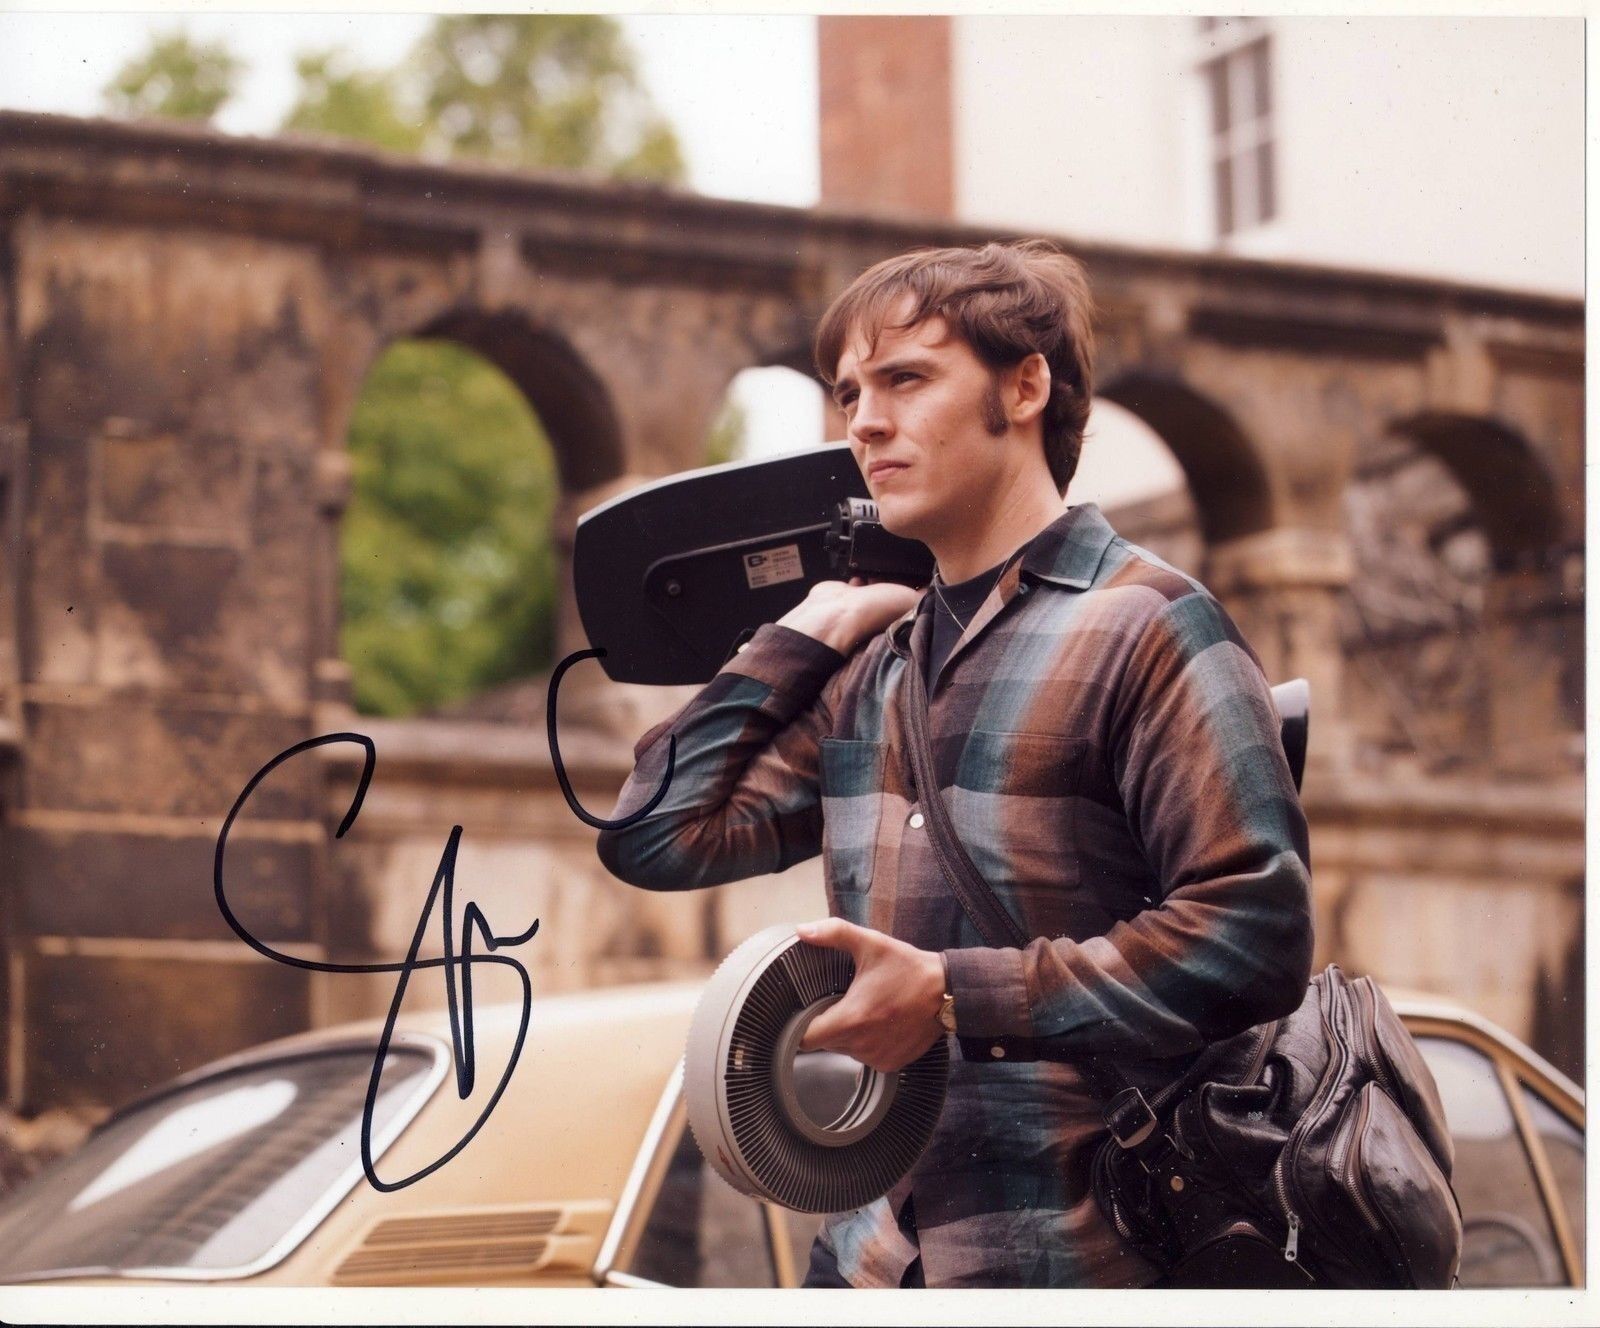 Sam Claflin Autograph Signed 8x10 Photo Poster painting AFTAL [7349]